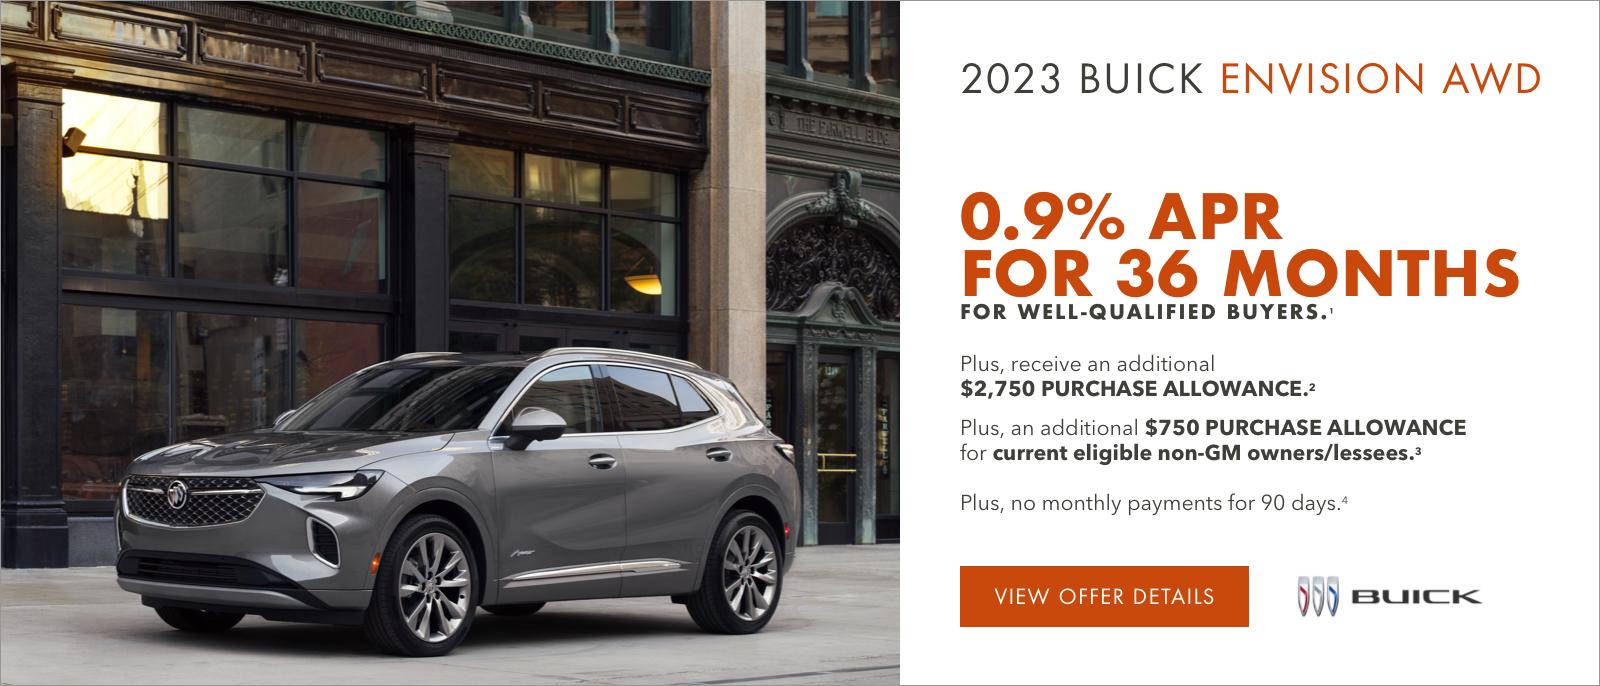 2023 Buick ENVISION AWD

0.9% APR FOR 36 MONTHS 
FOR WELL-QUALIFIED BUYERS.1

Plus, receive an additional $2,750 PURCHASE ALLOWANCE.2

Plus, an additional $750 PURCHASE ALLOWANCE for current eligible non-GM owners/lessees.3

Plus, no monthly payments for 90 days.4